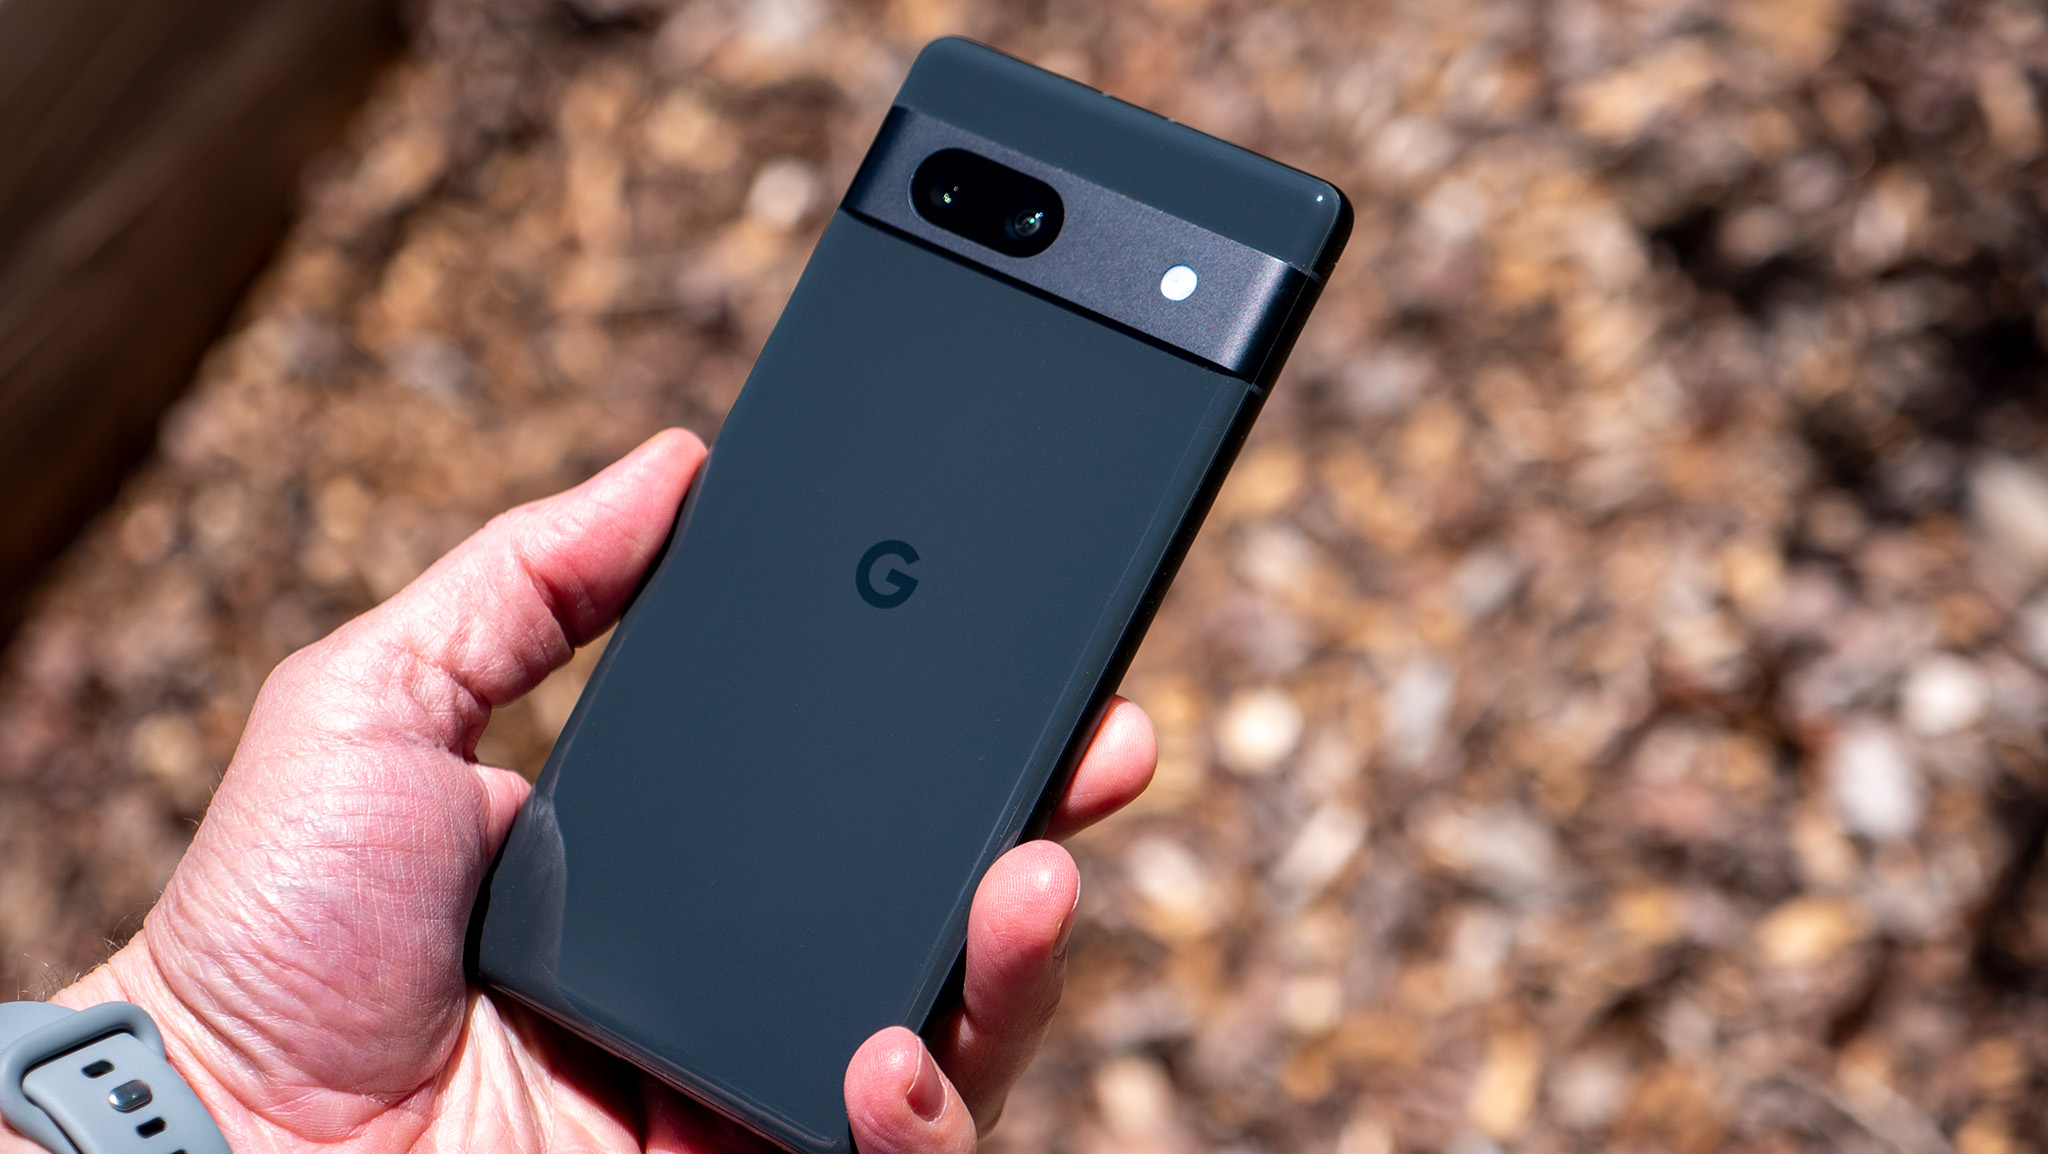 The back of the Charcoal Google Pixel 7a